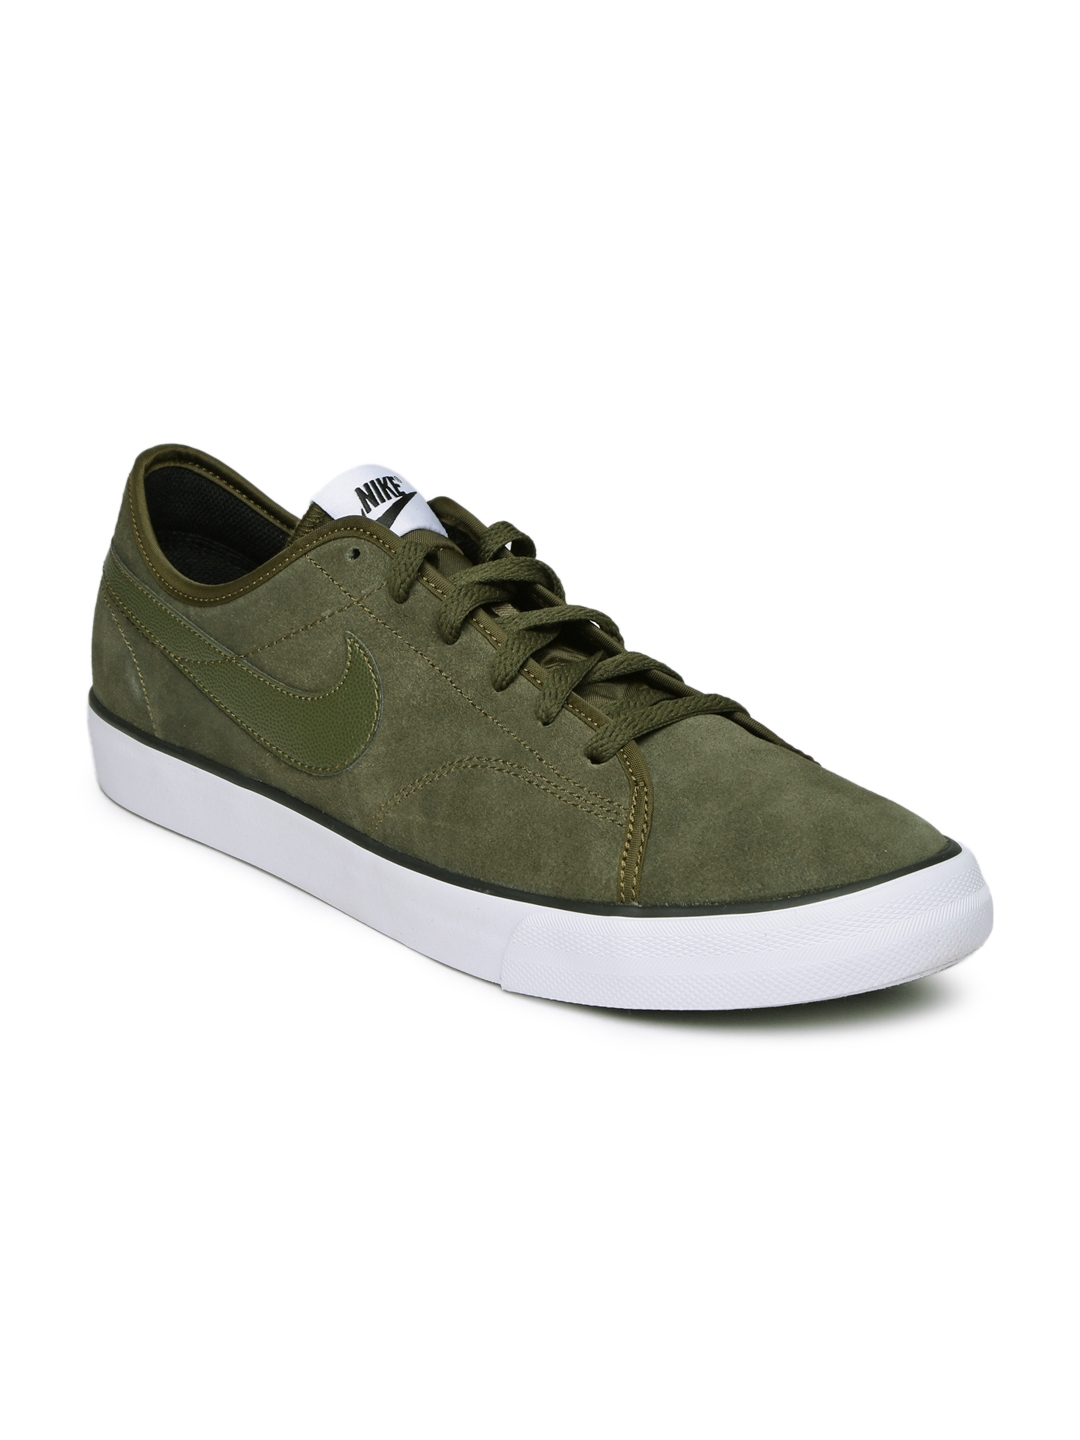 Nike Men Olive Green Suede Casual Shoes - Casual Shoes for Men 1003508 Myntra